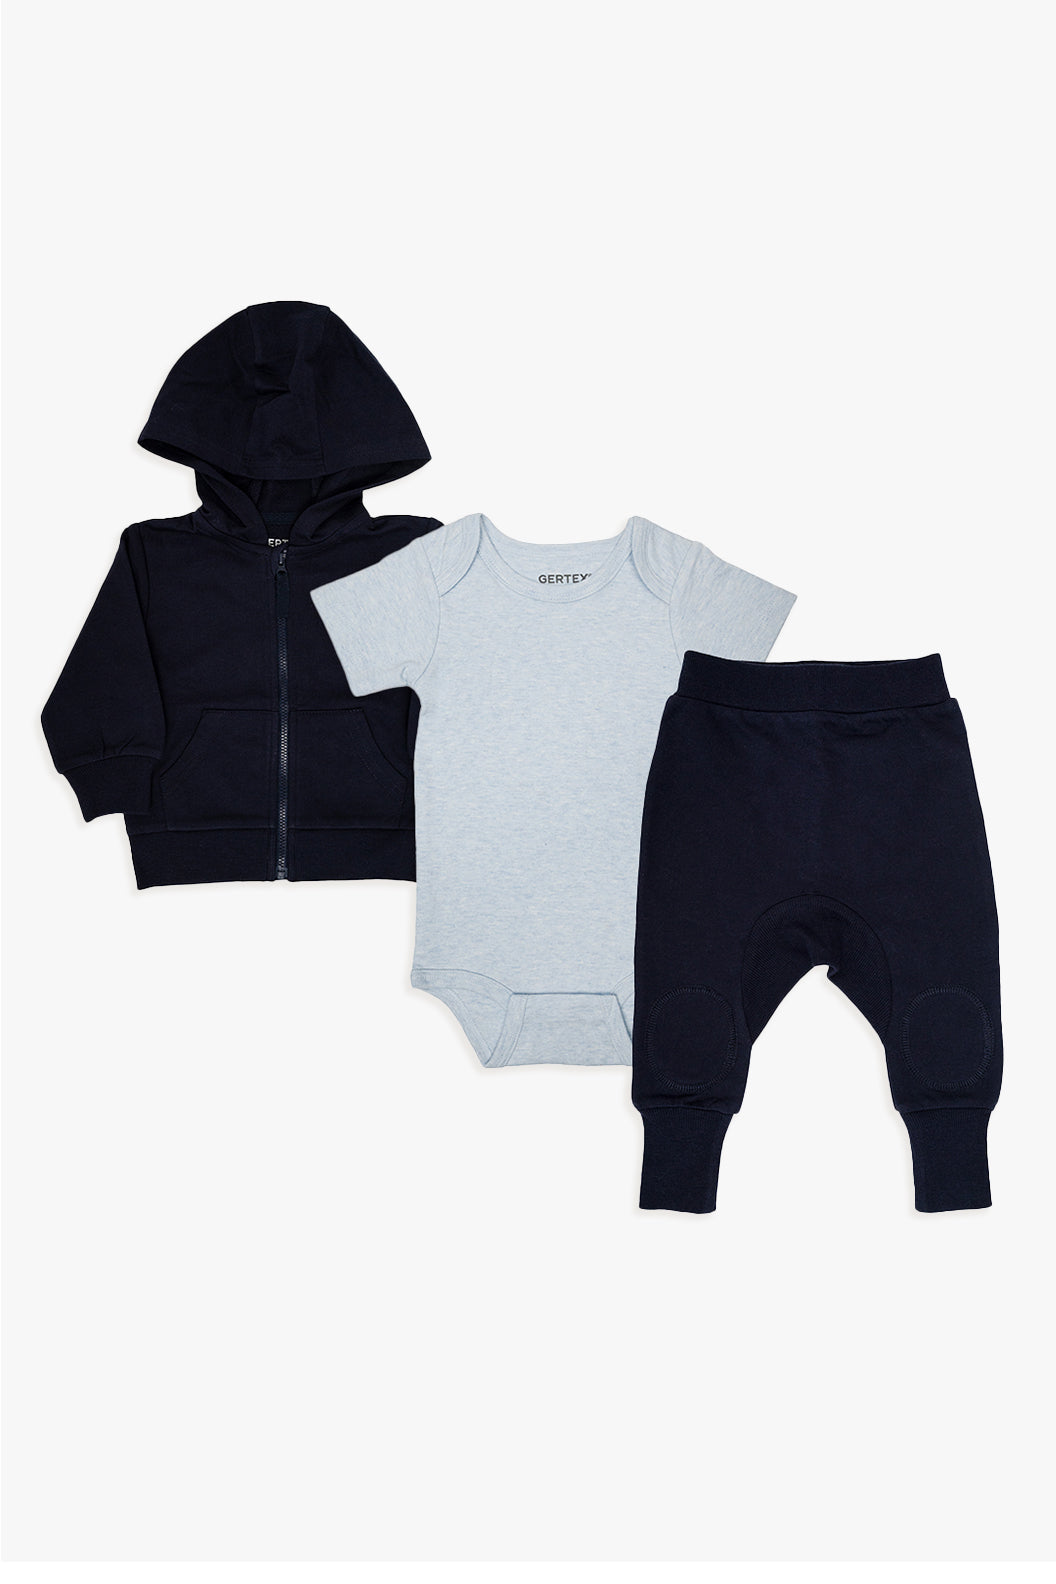 Navy Baby French Terry Sweatsuit Bundle